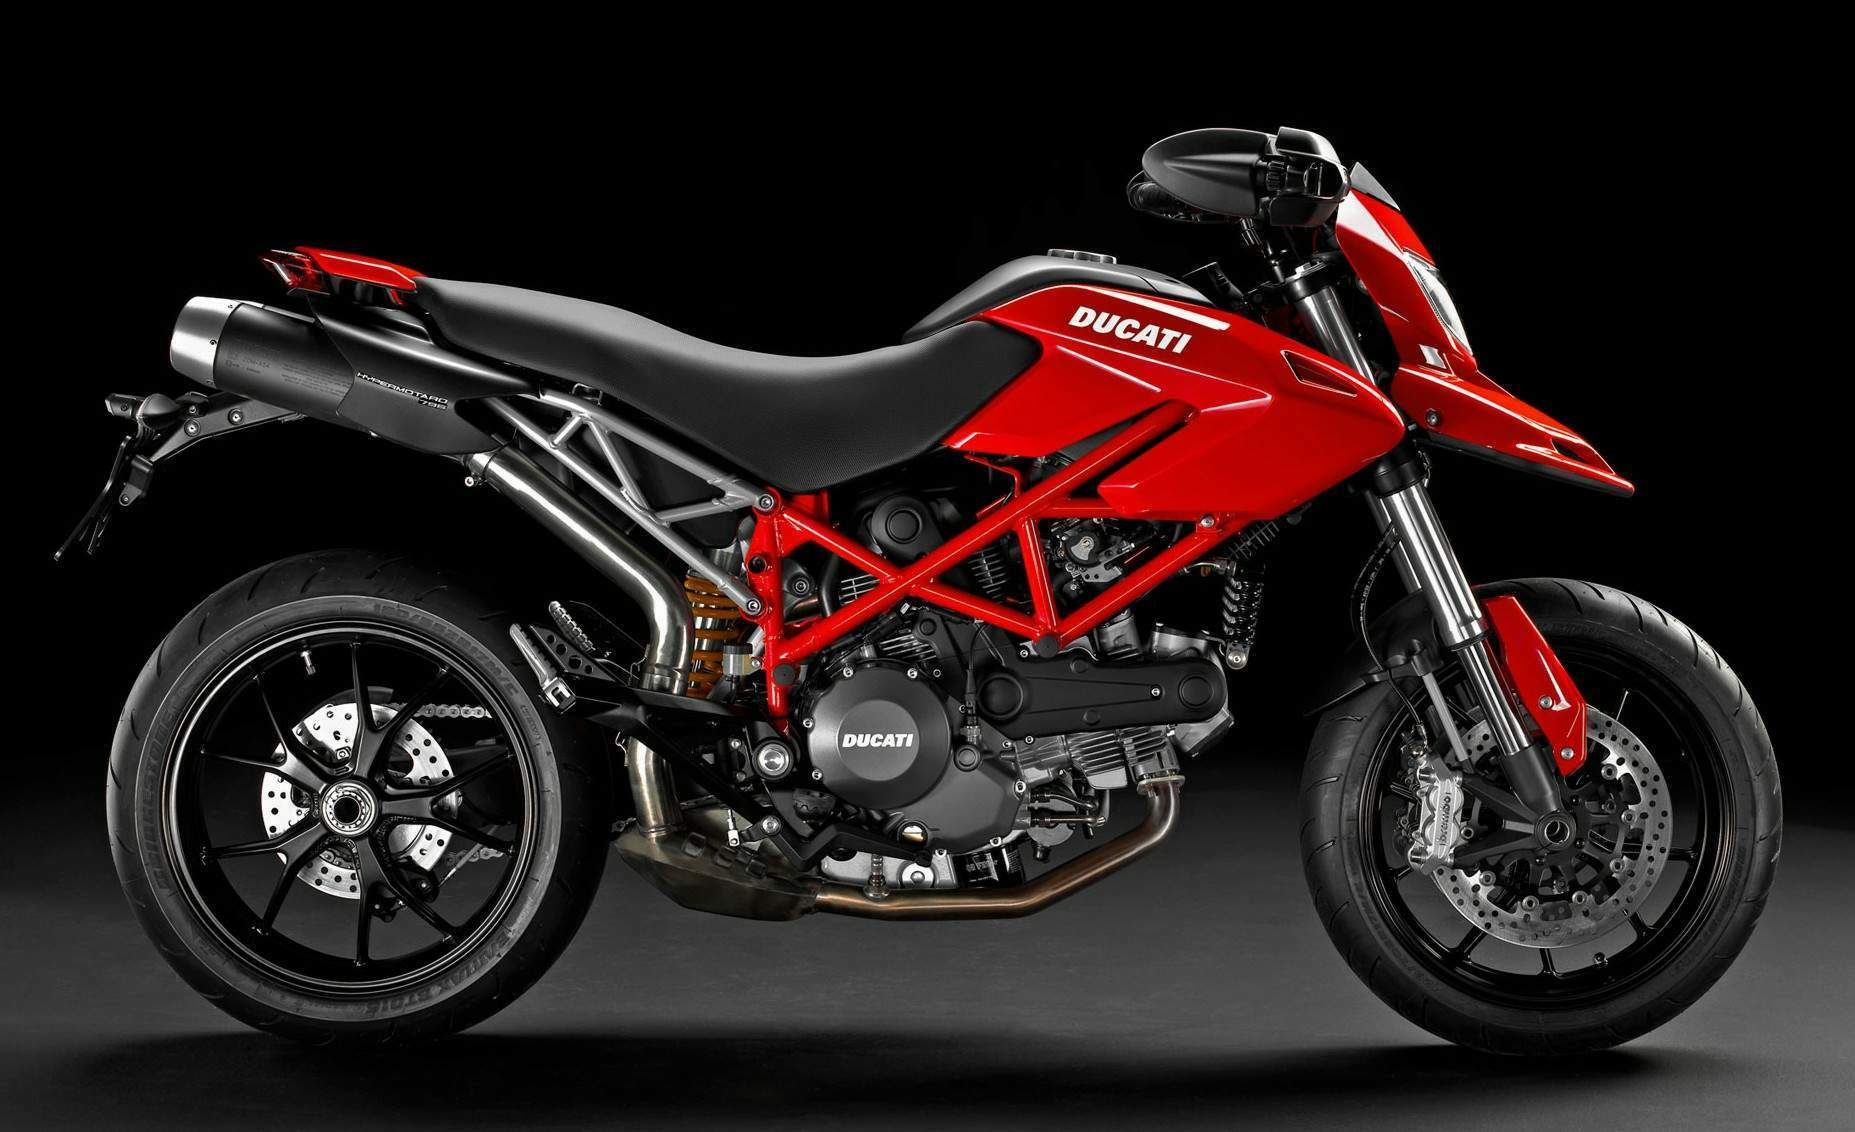 DUCATI HYPERMOTARD 796 20092012 Motorcycle Review  MCN